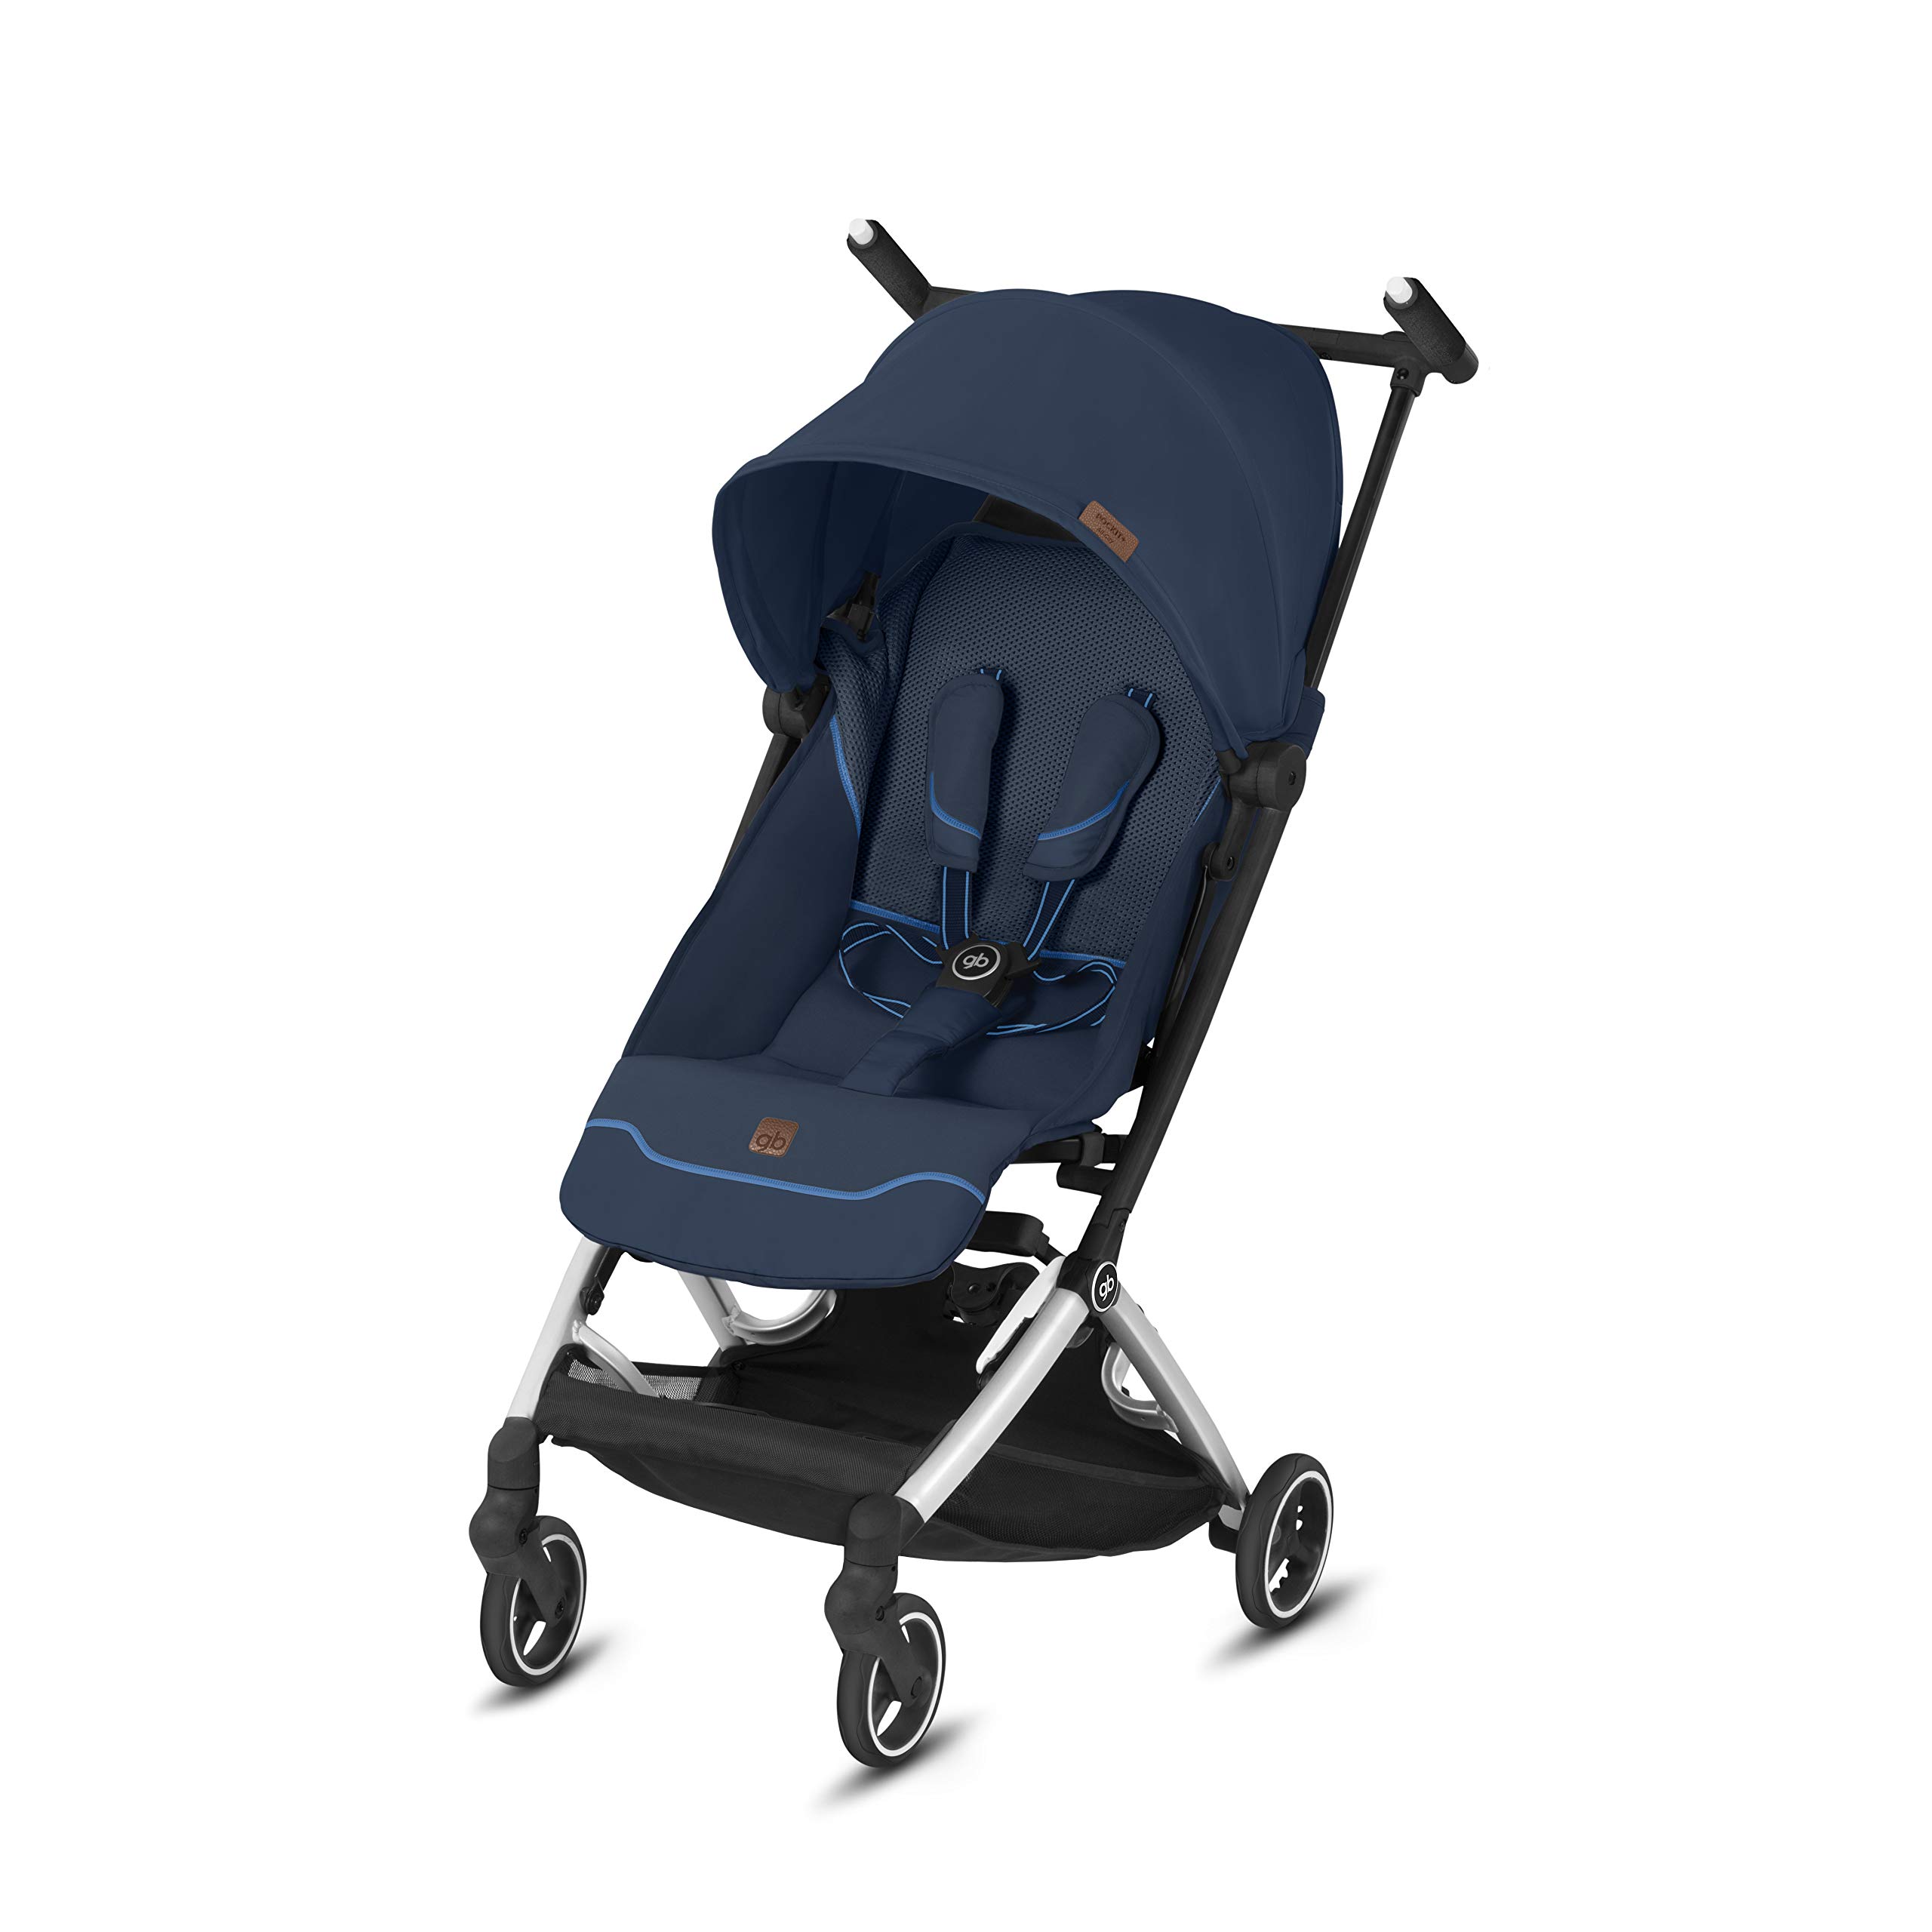 gb Pockit+ All City, Ultra Compact Lightweight Travel Stroller with Front Wheel Suspension, Full Canopy, and Reclining Seat in Night Blue